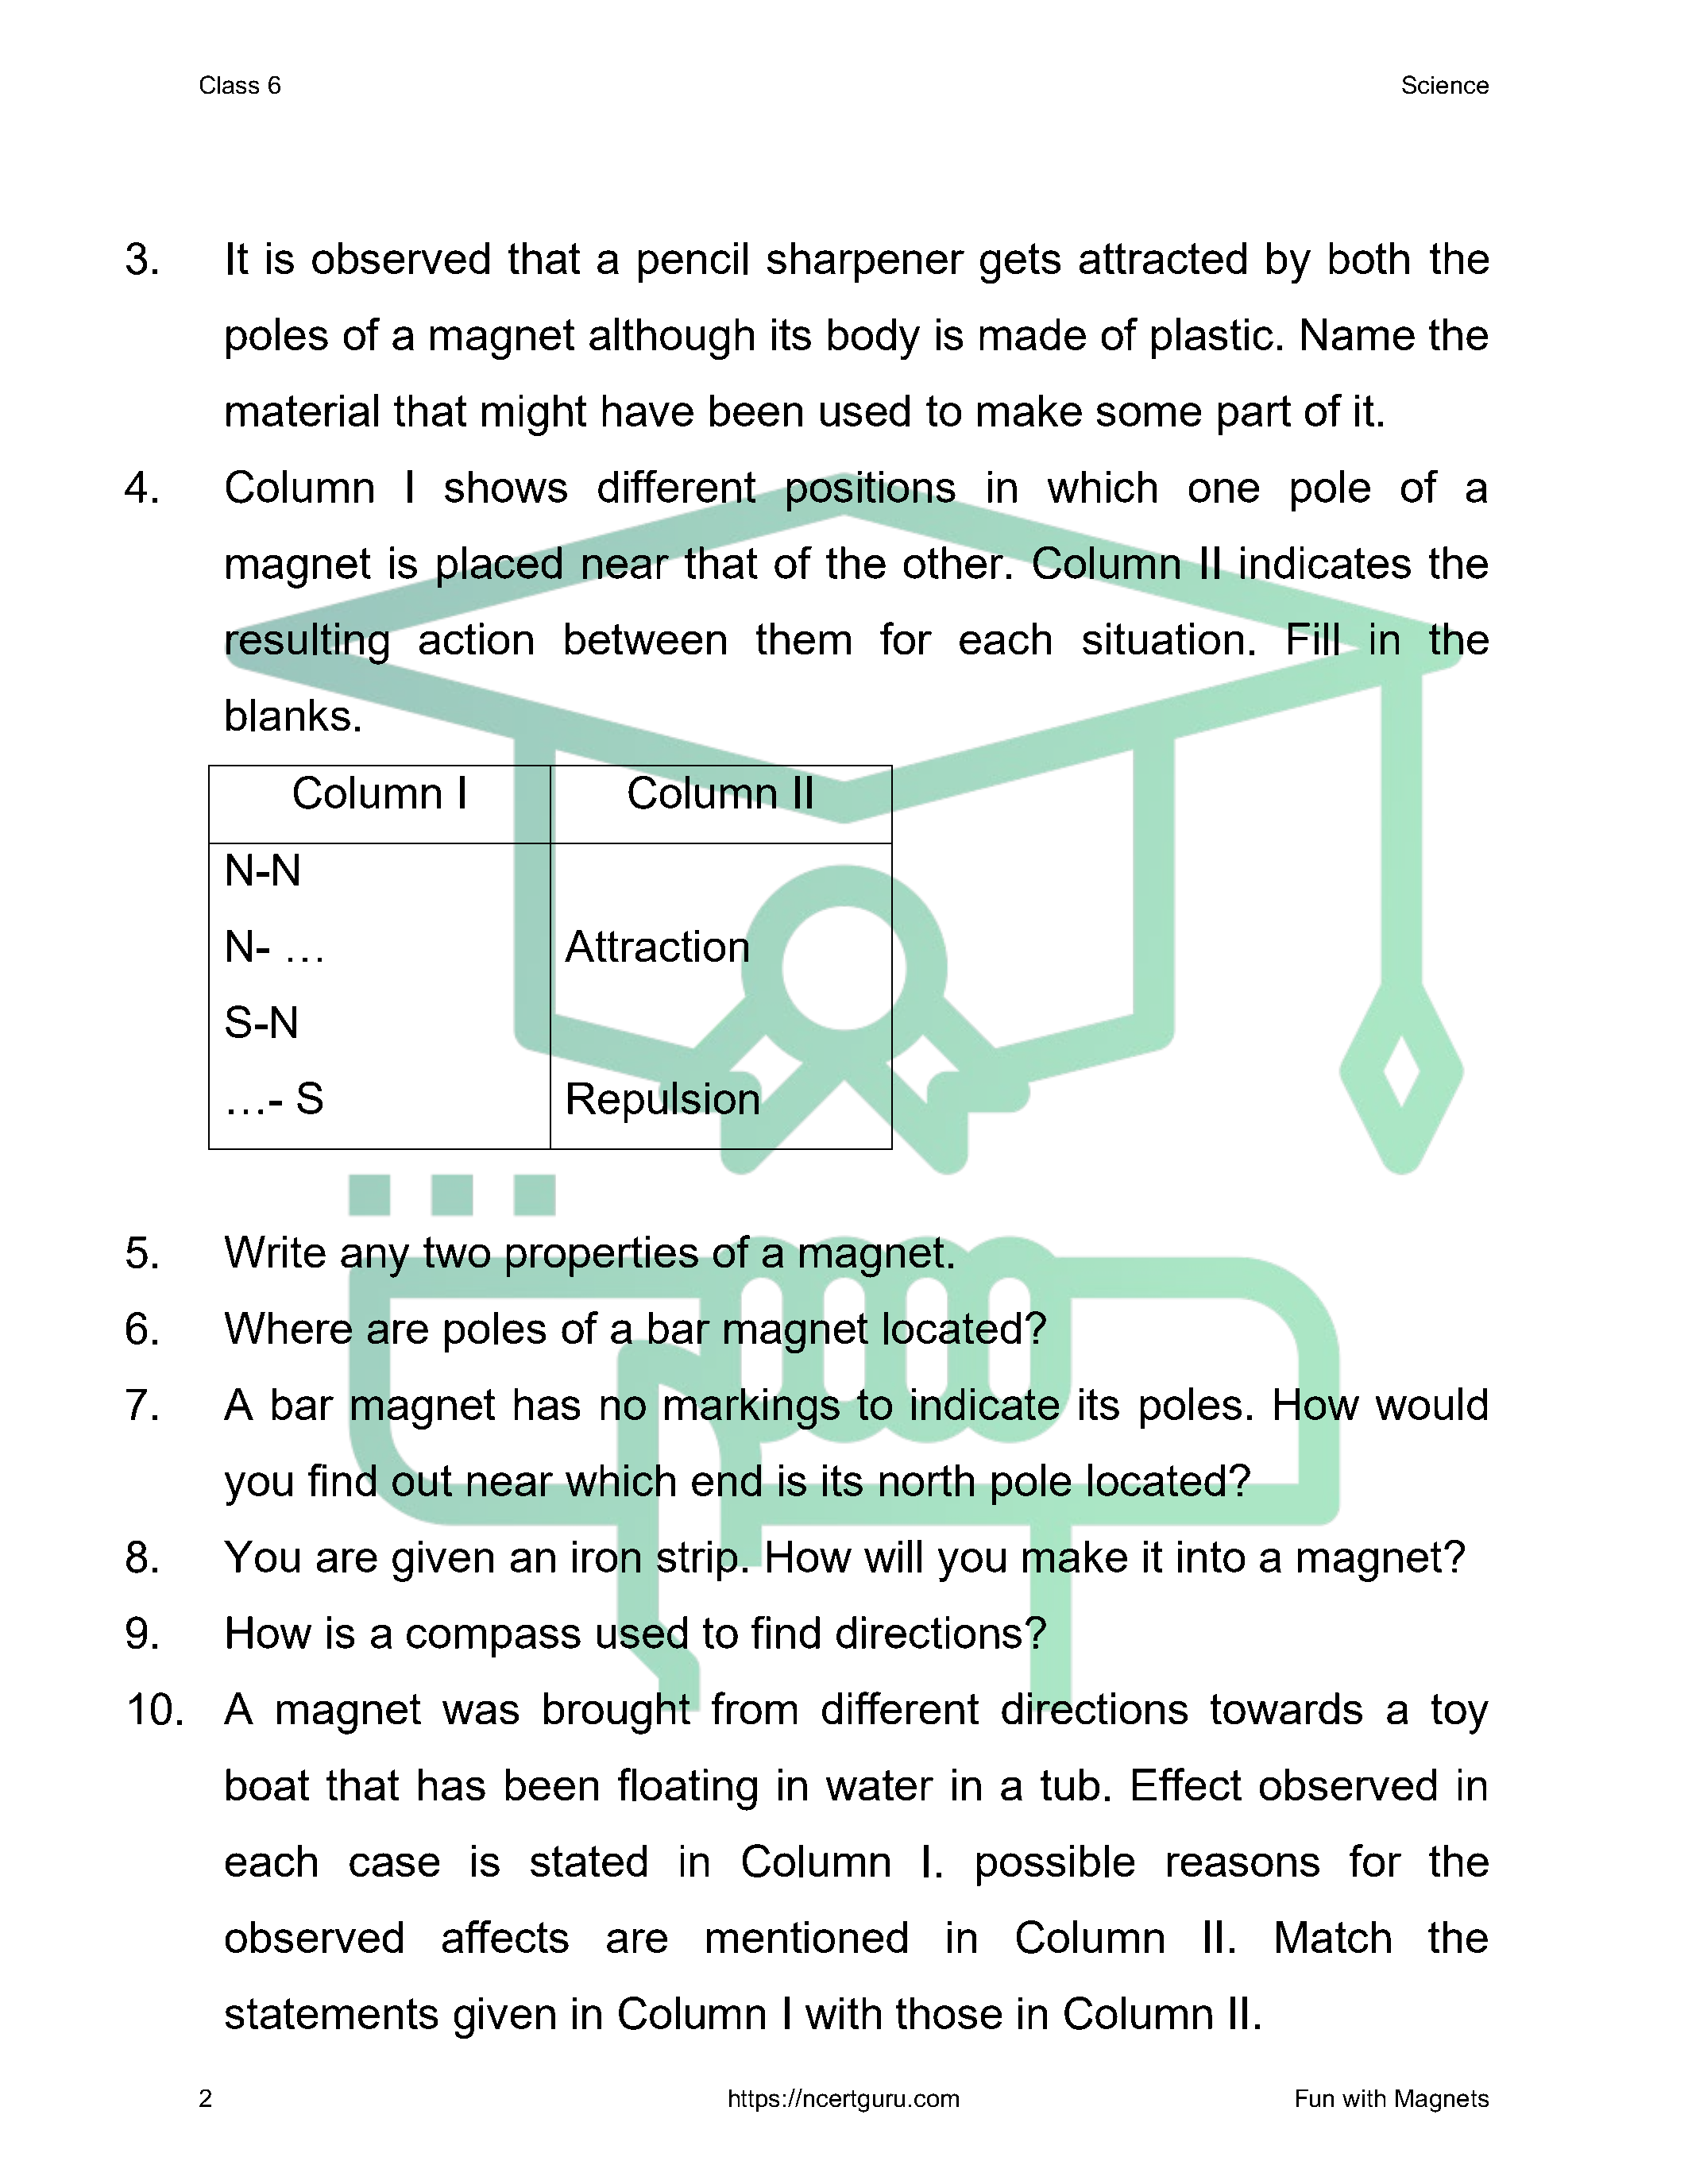 NCERT Solutions for Class 6 science Chapter 13